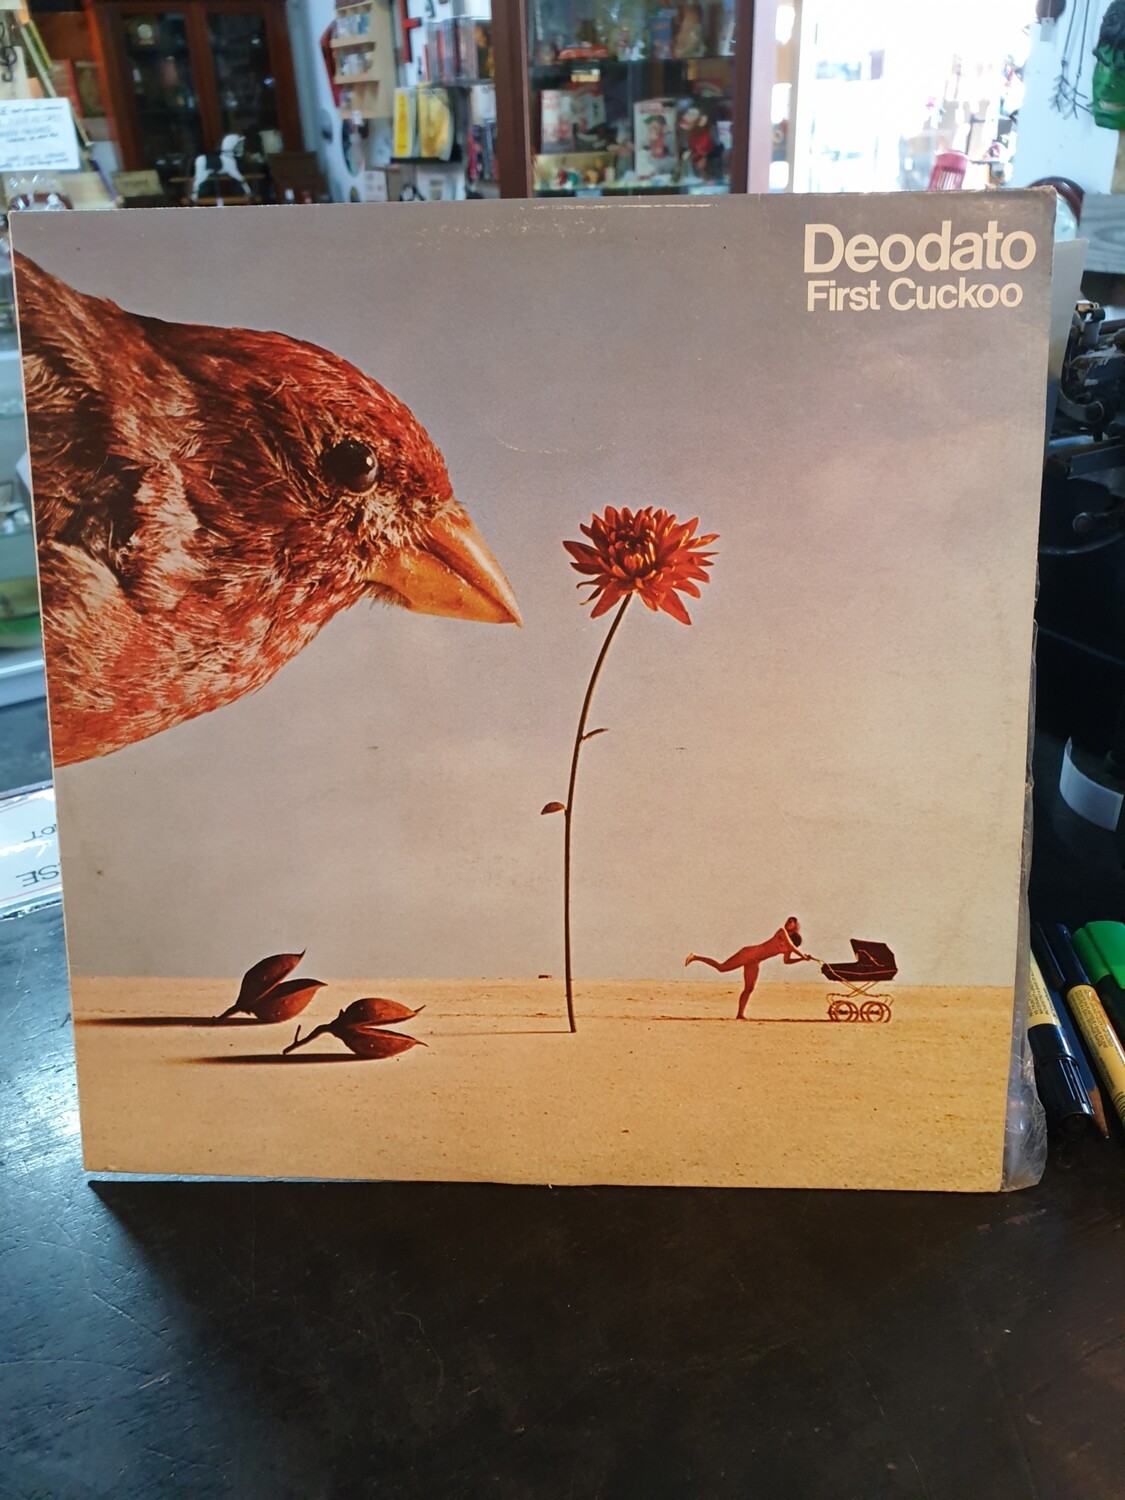 DEODATO FIRST CUCKOO